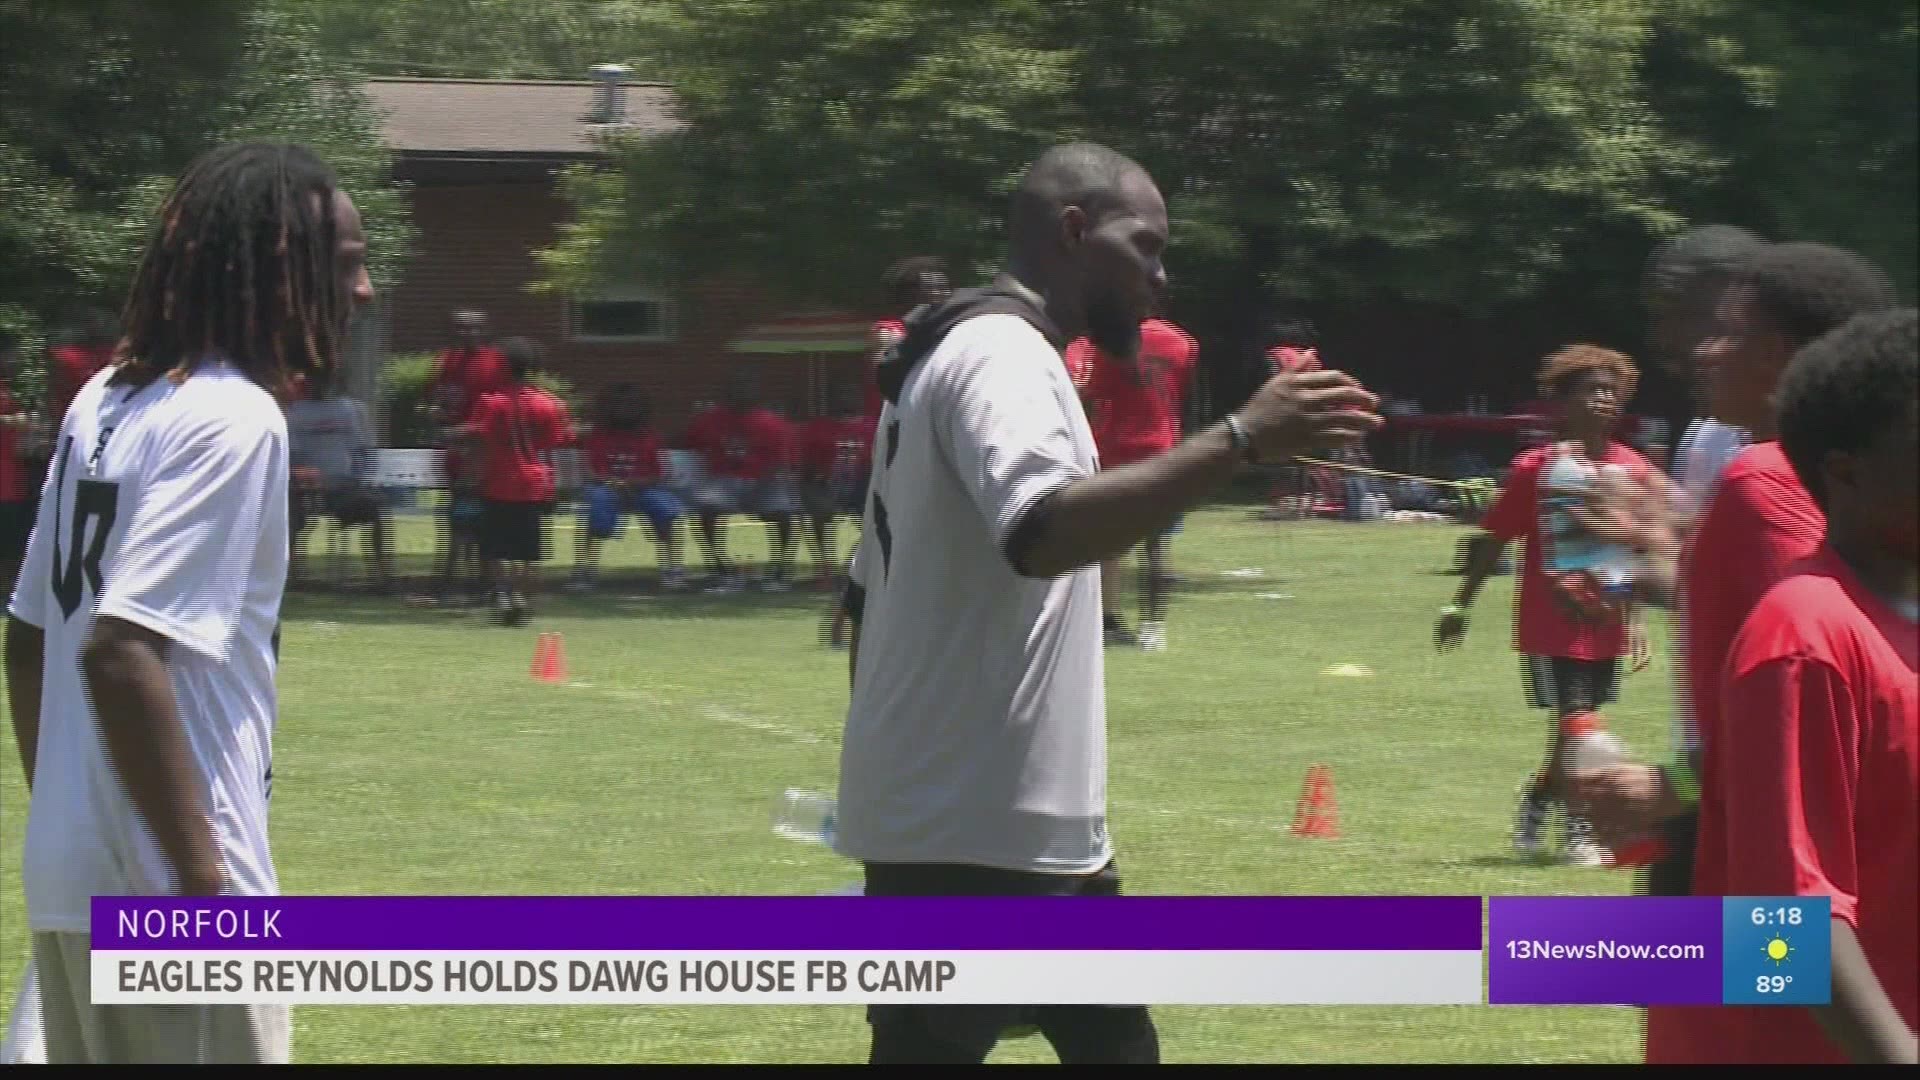 LaRoy Reynolds held his Dawg House Youth Football Camp in Norfolk on Saturday. The event was free for the nearly 400 campers.